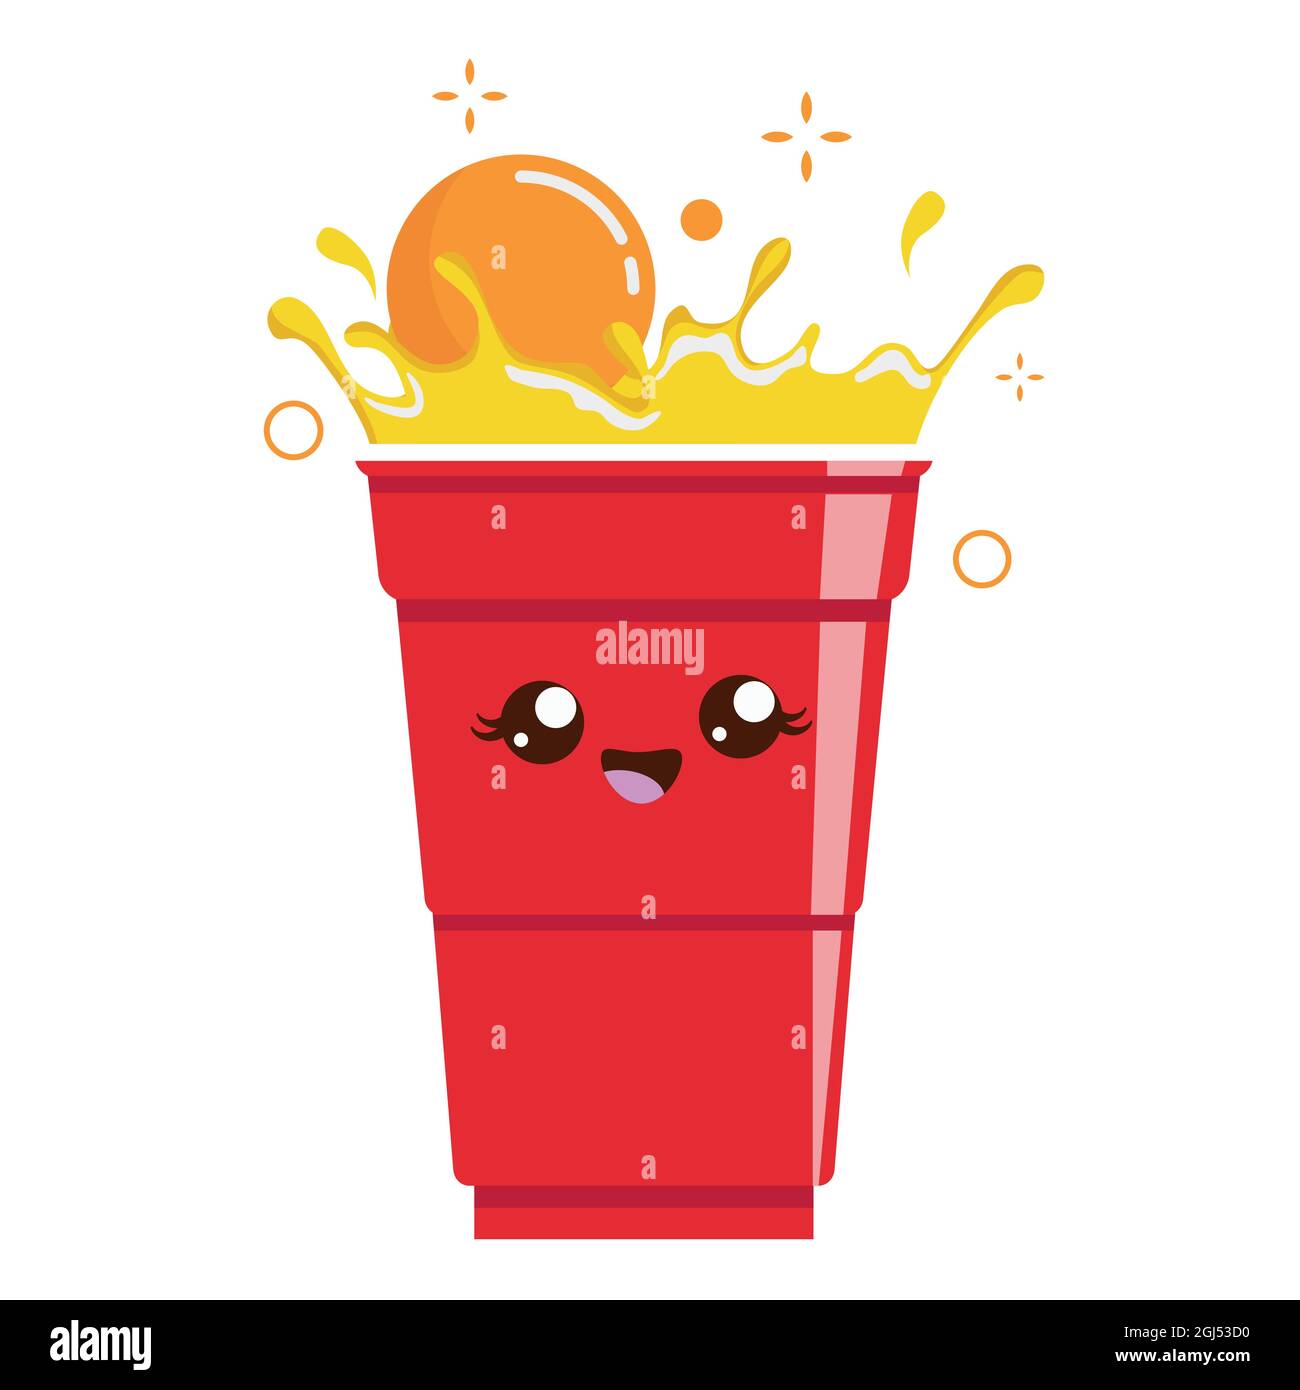 https://c8.alamy.com/comp/2GJ53D0/beer-pong-cup-mascot-plastic-cup-and-ball-with-splashing-beer-traditional-party-drinking-game-vector-2GJ53D0.jpg